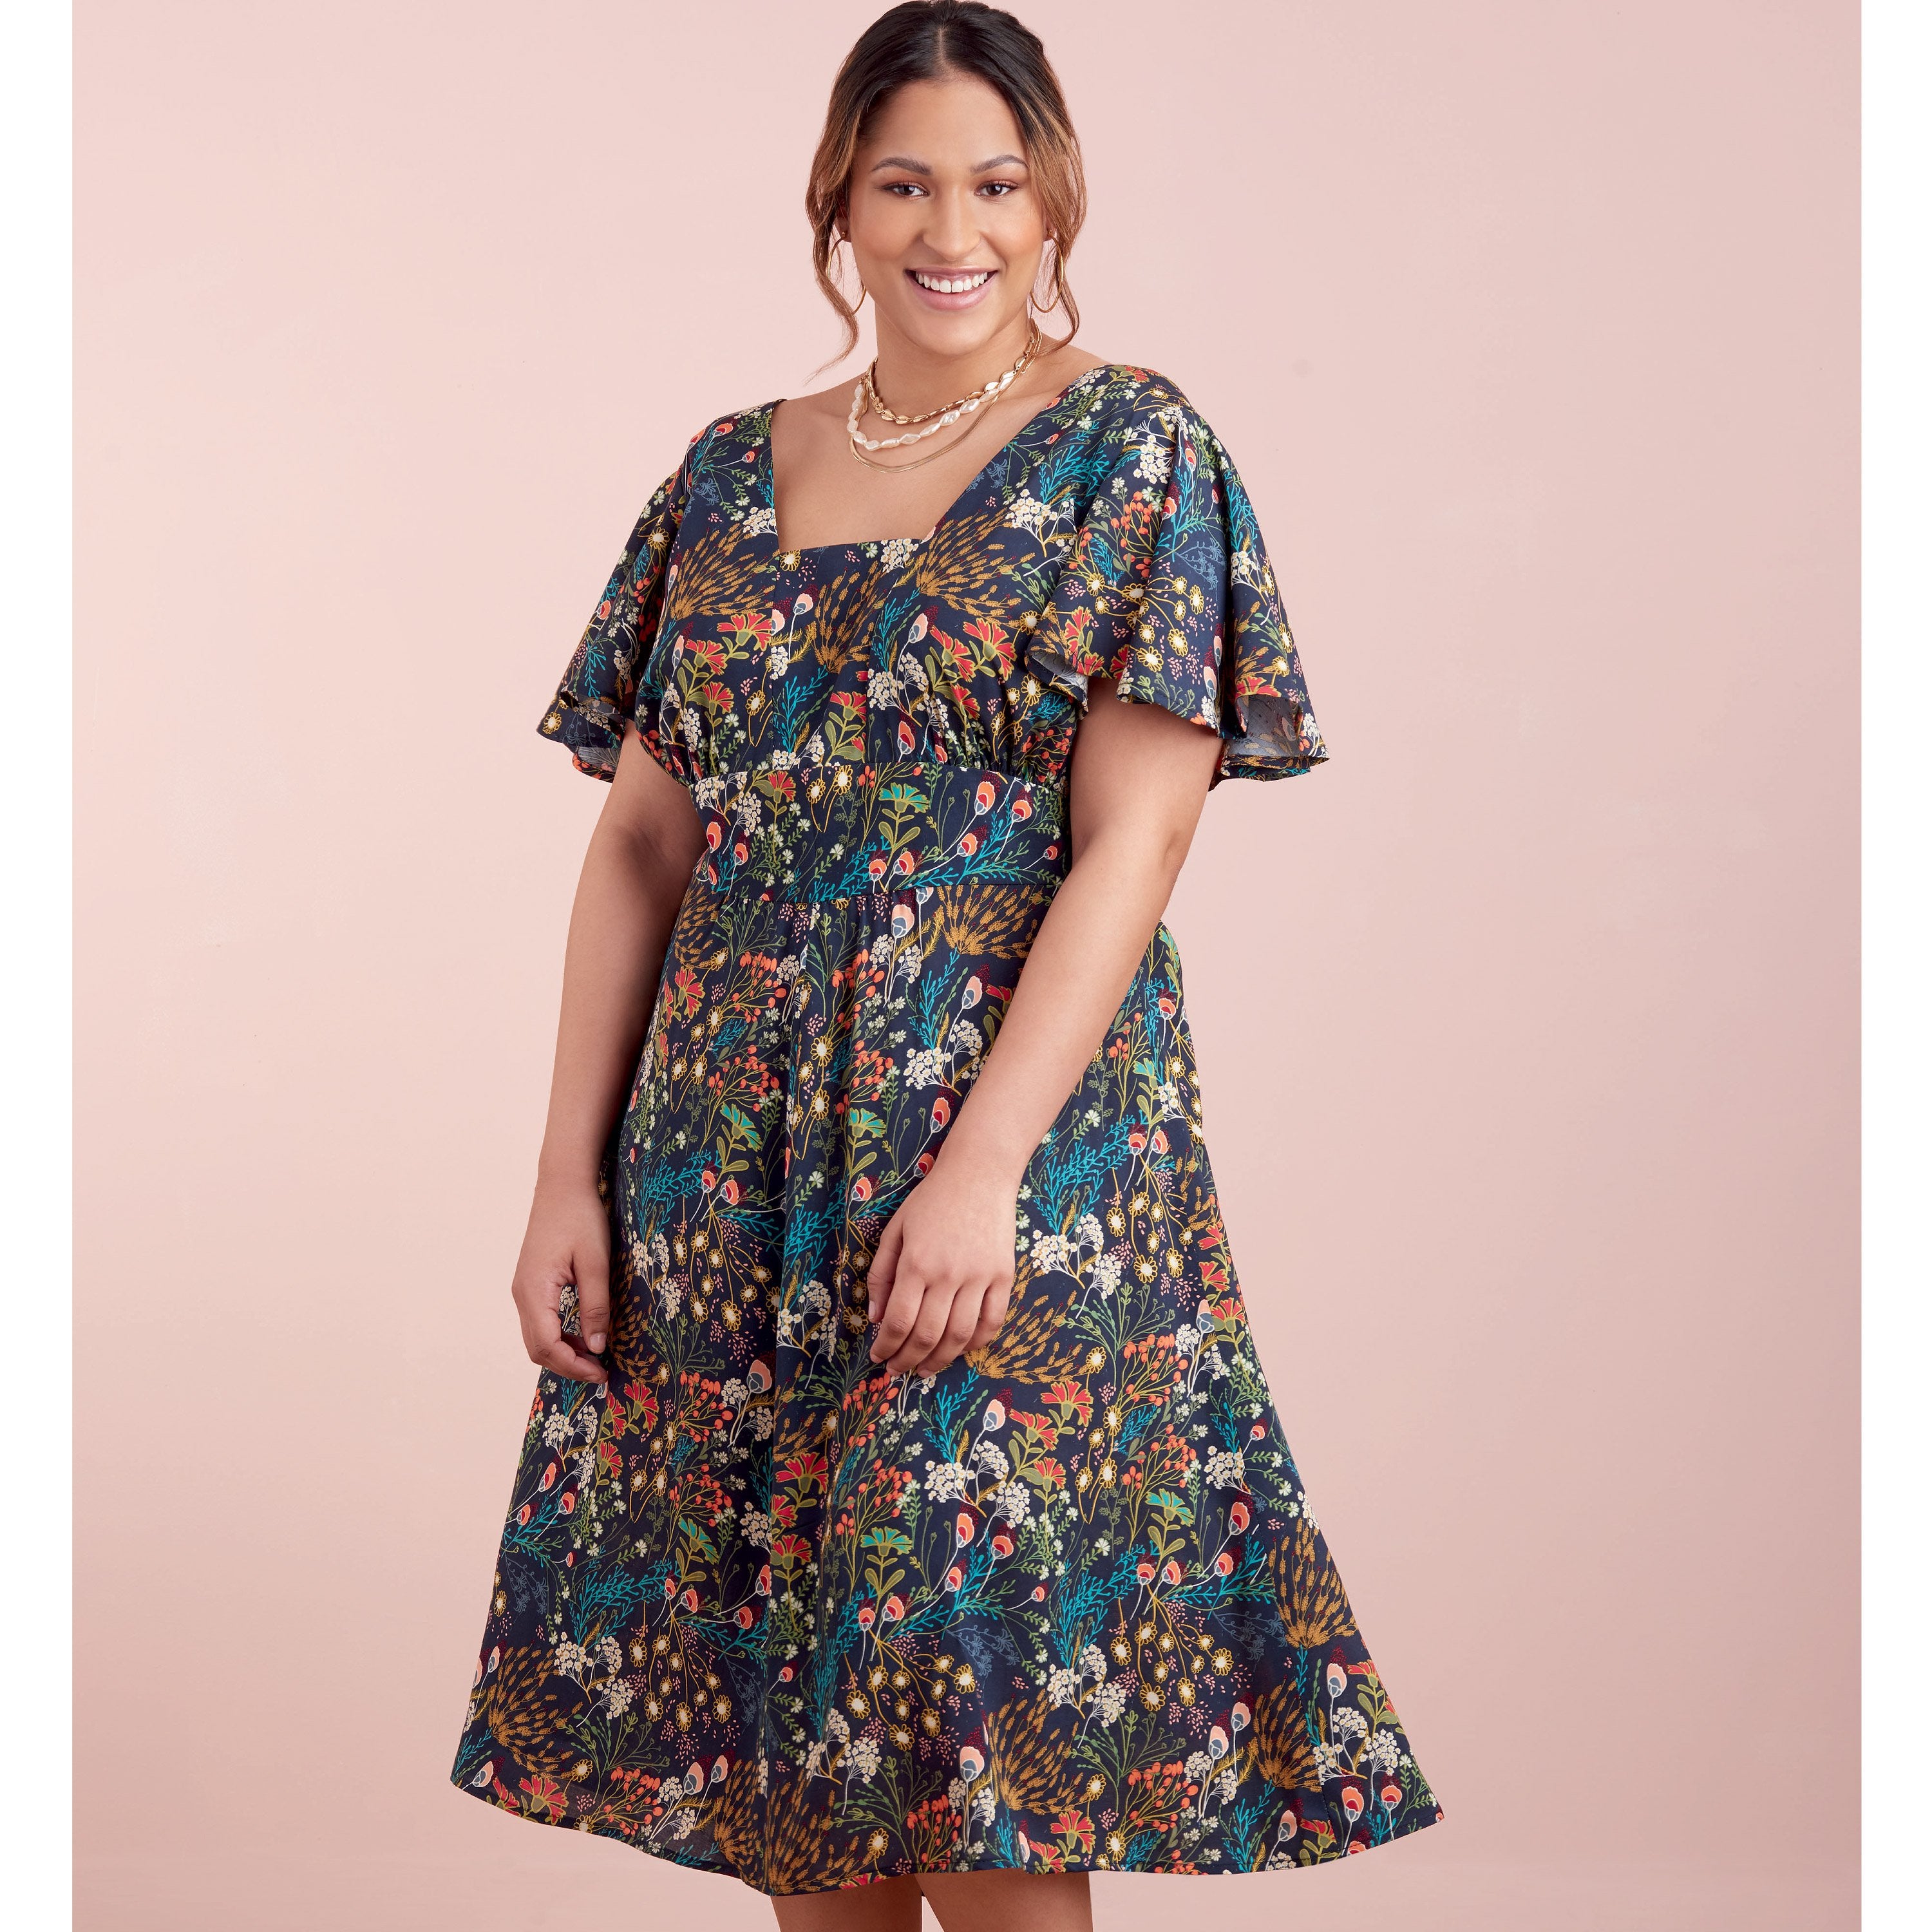 Simplicity Sewing Pattern S9325 Misses' and Women's Dress with Length Variations from Jaycotts Sewing Supplies